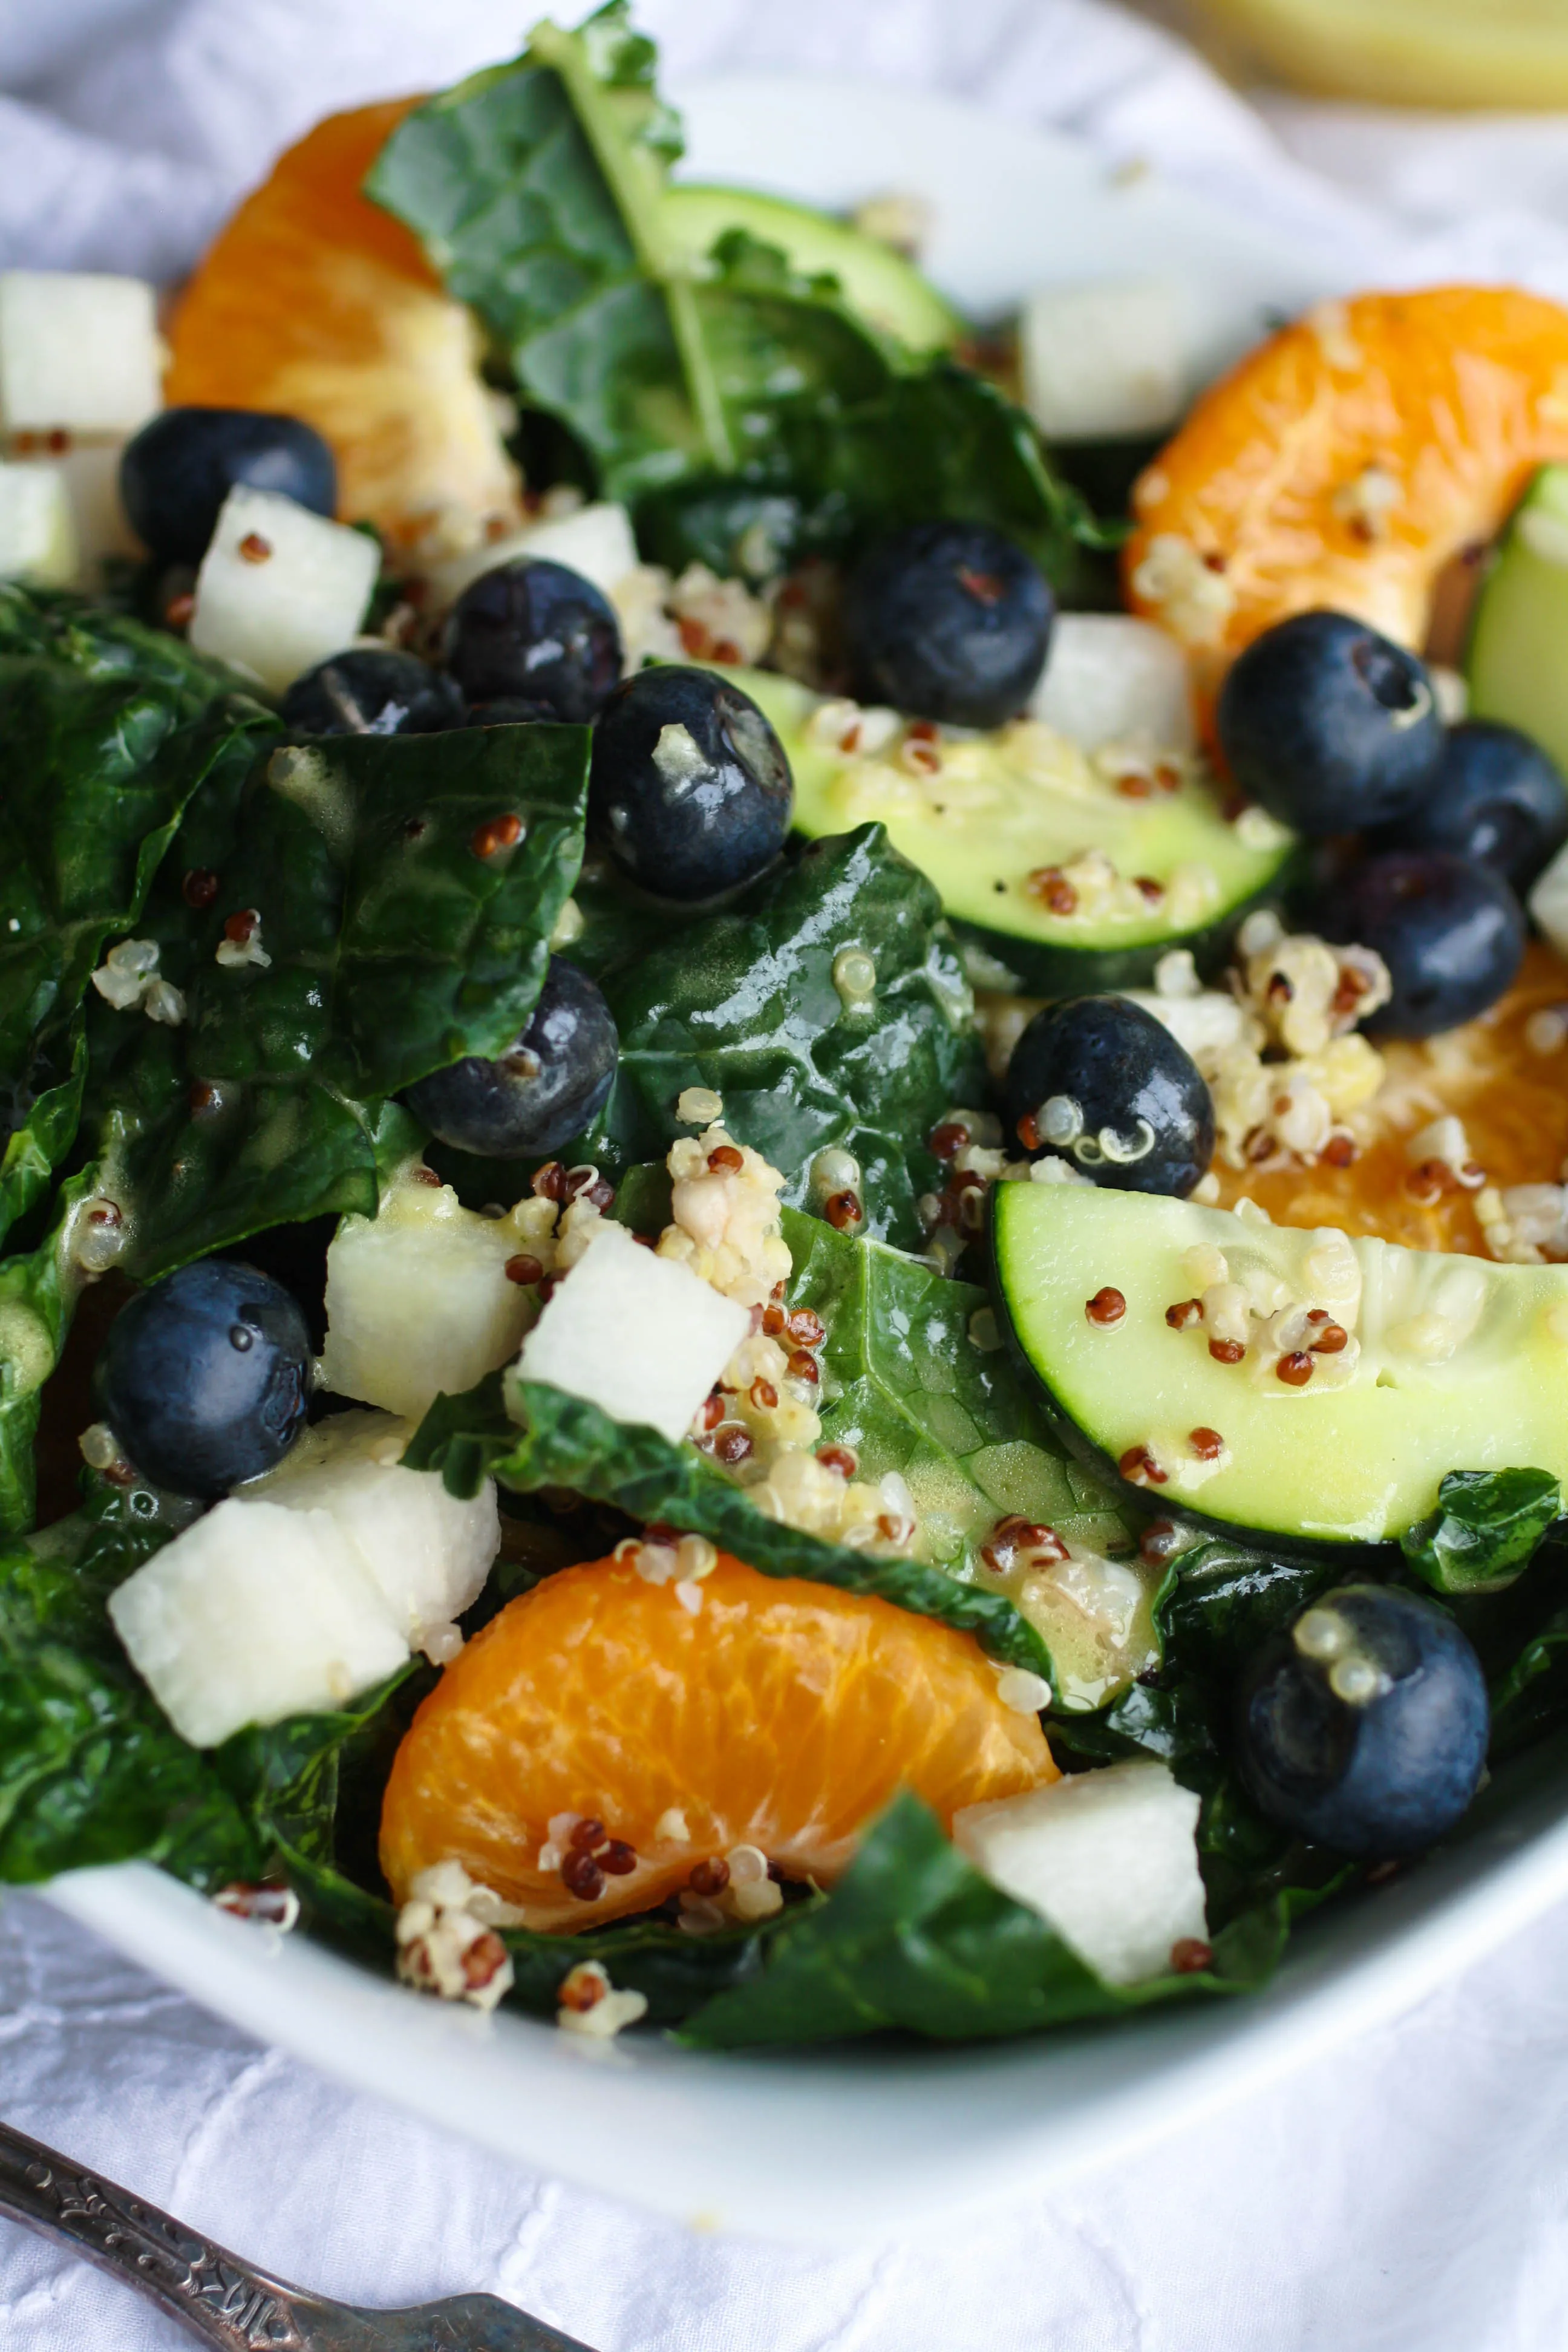 Kale-Quinoa Salad with Orange Vinaigrette is a salad that's full of goodness! It's an easy salad to make that will be perfect as your next meal!